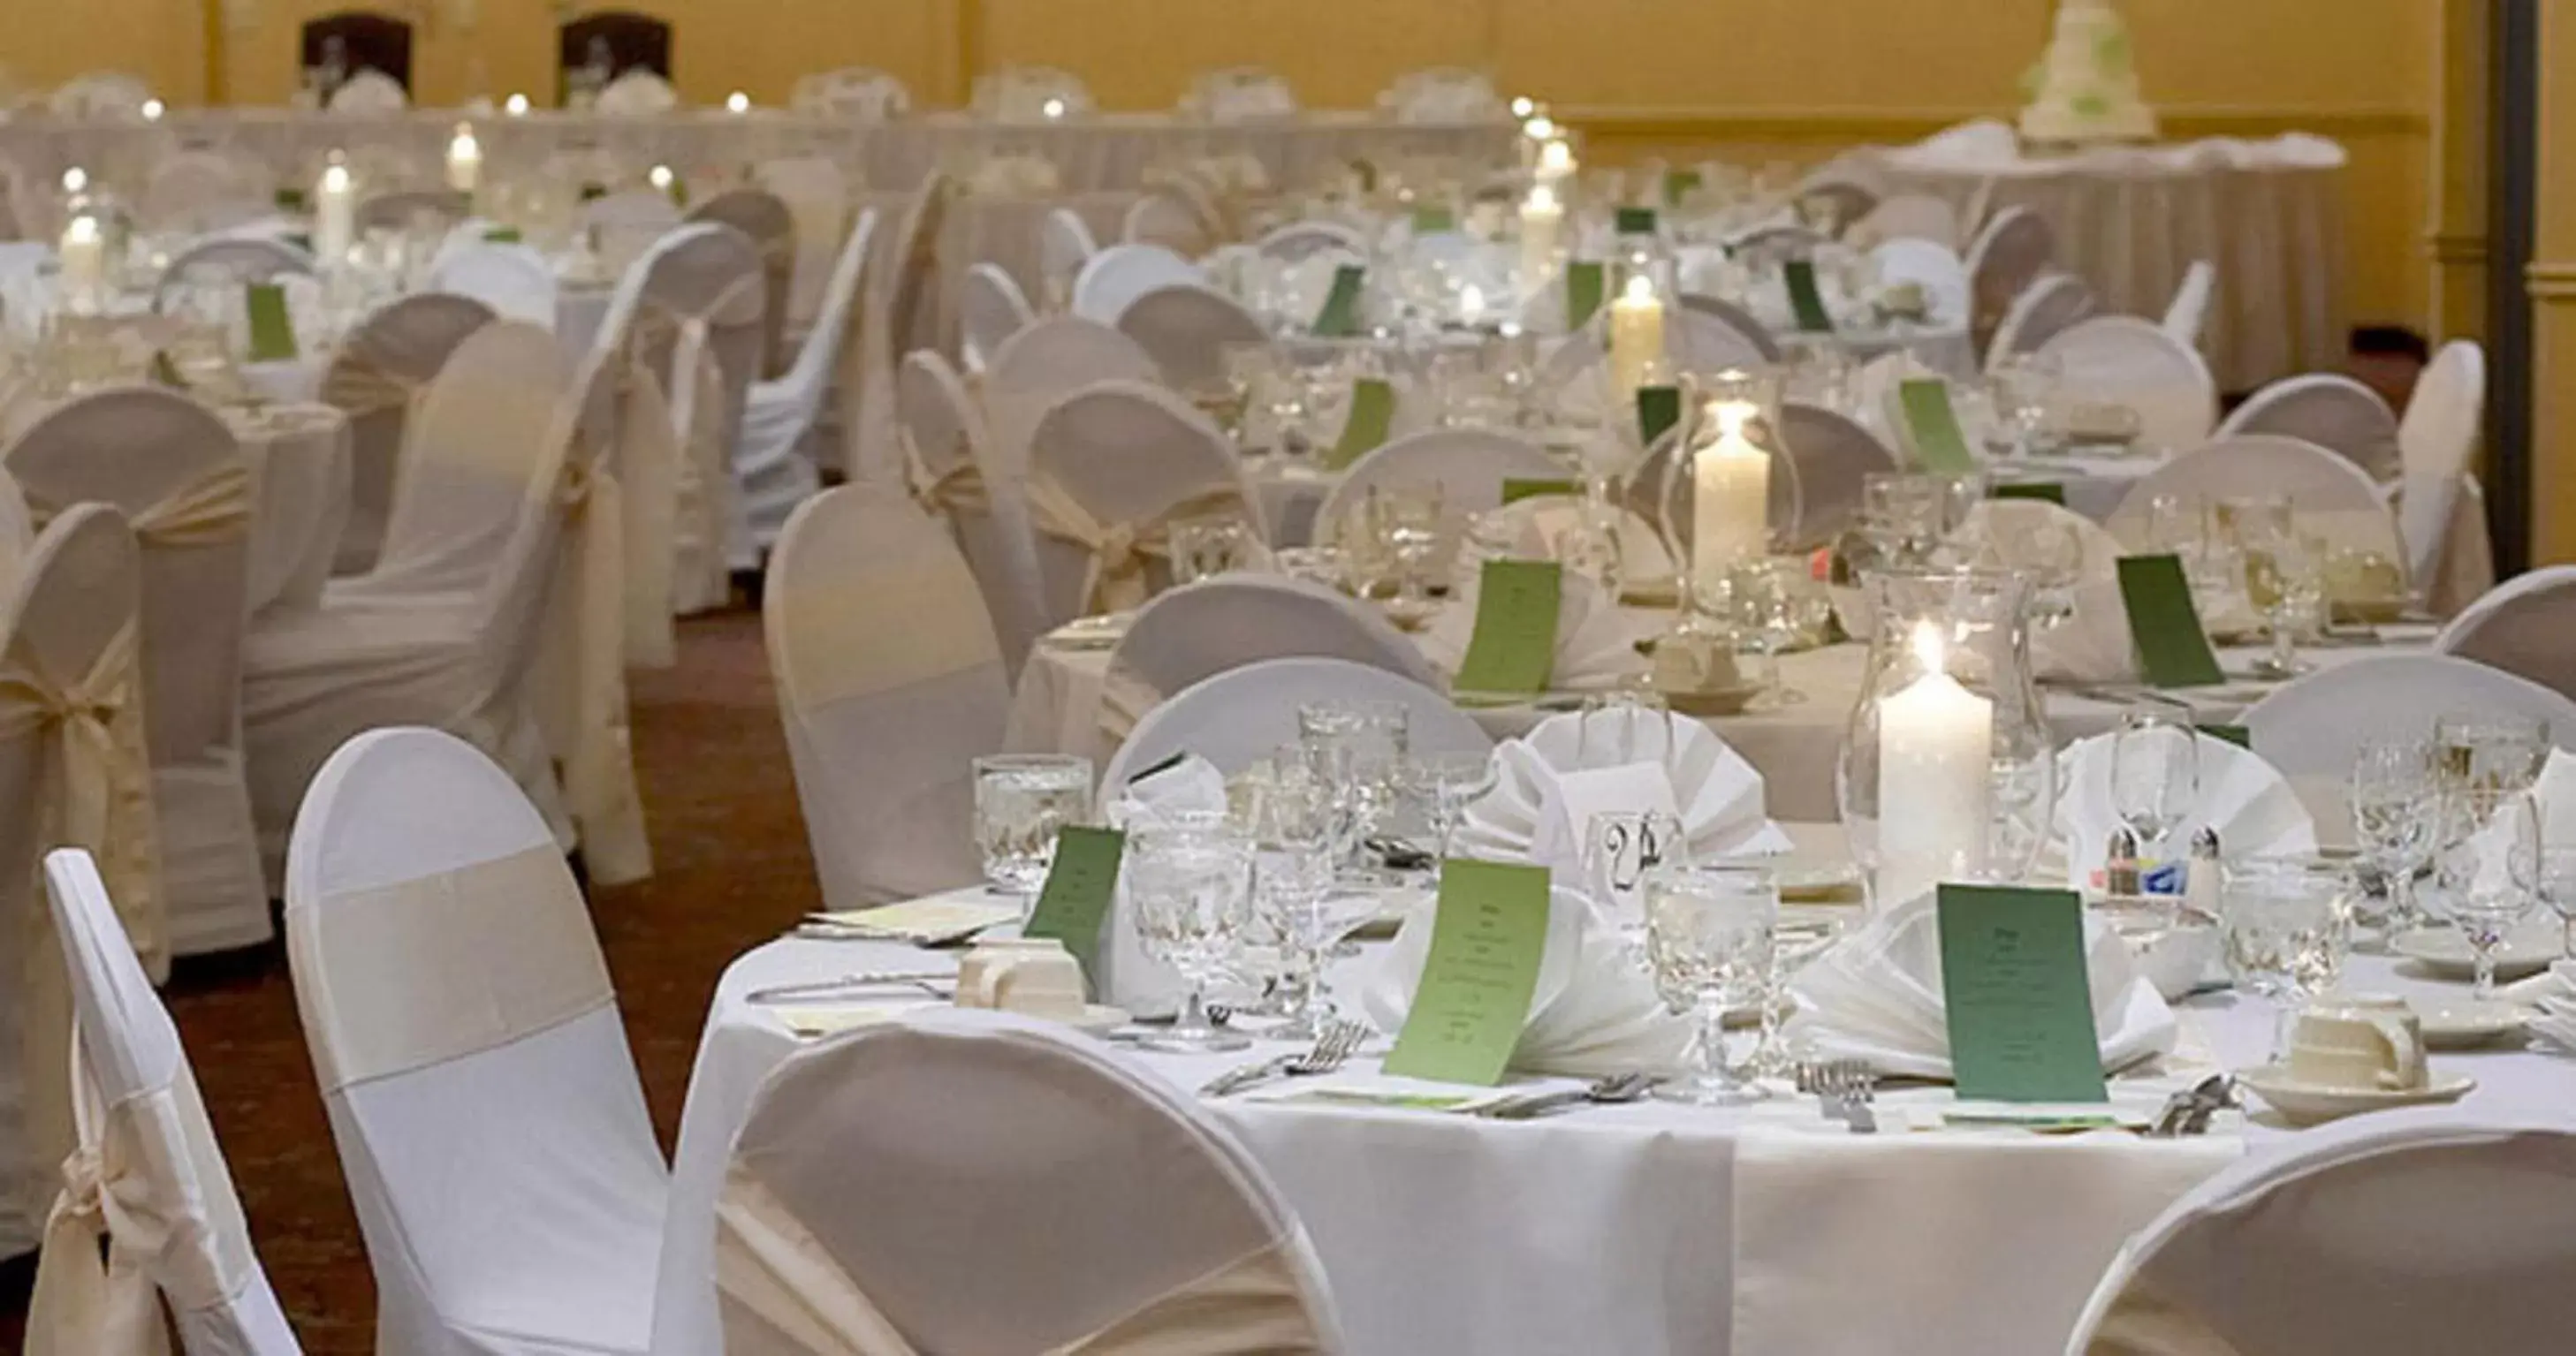 Banquet/Function facilities, Banquet Facilities in The Chateau Bloomington Hotel and Conference Center